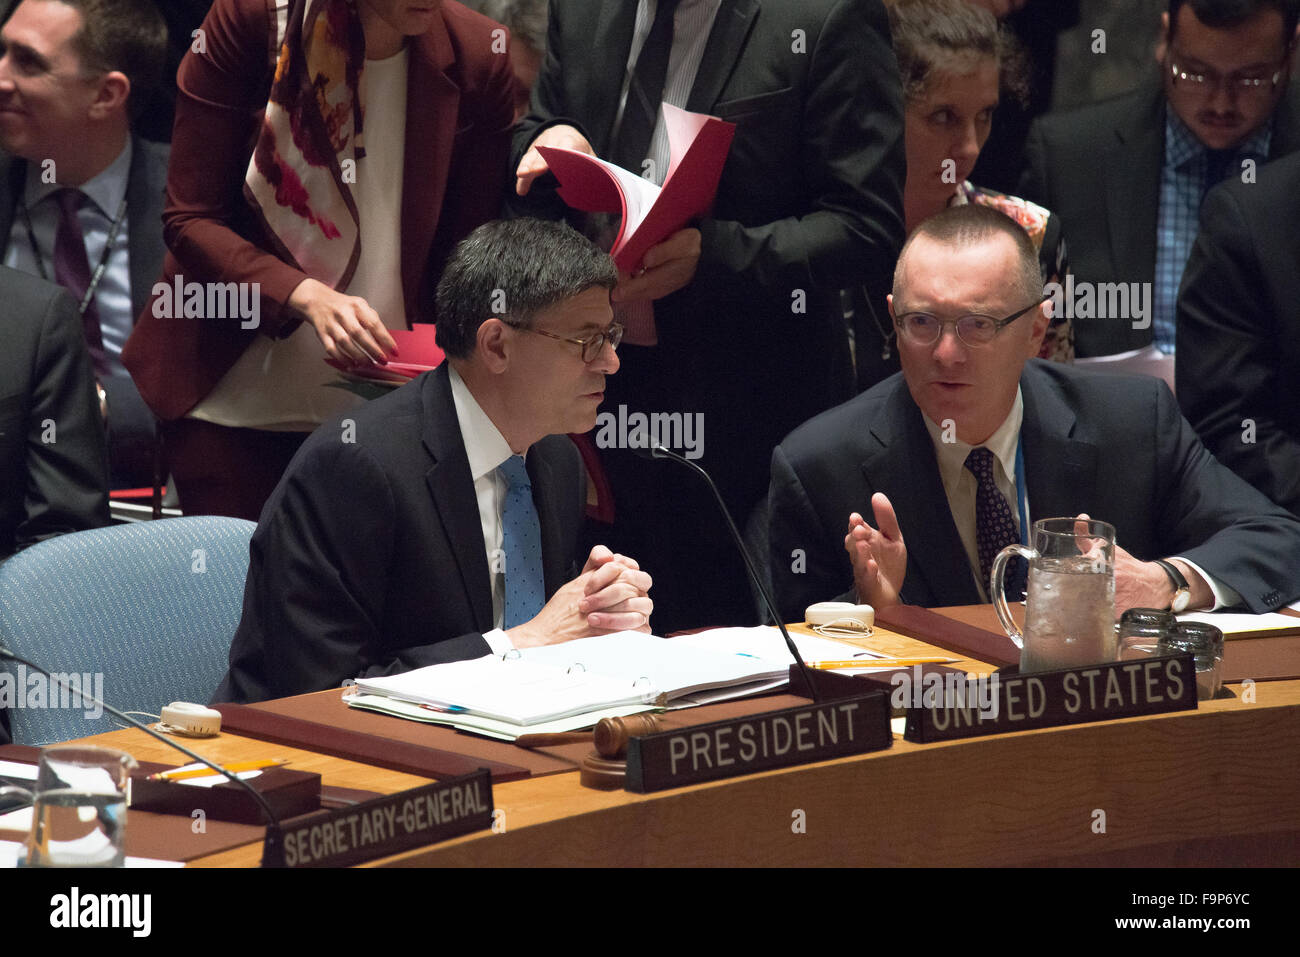 New York, United States. 17th Dec, 2015. U.S. Treasury Secretary Jack Lew (right) sits at the Security Council President's seat. As part of a series of Security Council sessions on the subject of terrorism, especially Islamic State extremism in Syria, U.S. Treasury Secretary Jack Lew chaired a session of the Council on efforts to restrict financing to Islamic State groups. Credit:  Albin Lohr-Jones/Pacific Press/Alamy Live News Stock Photo